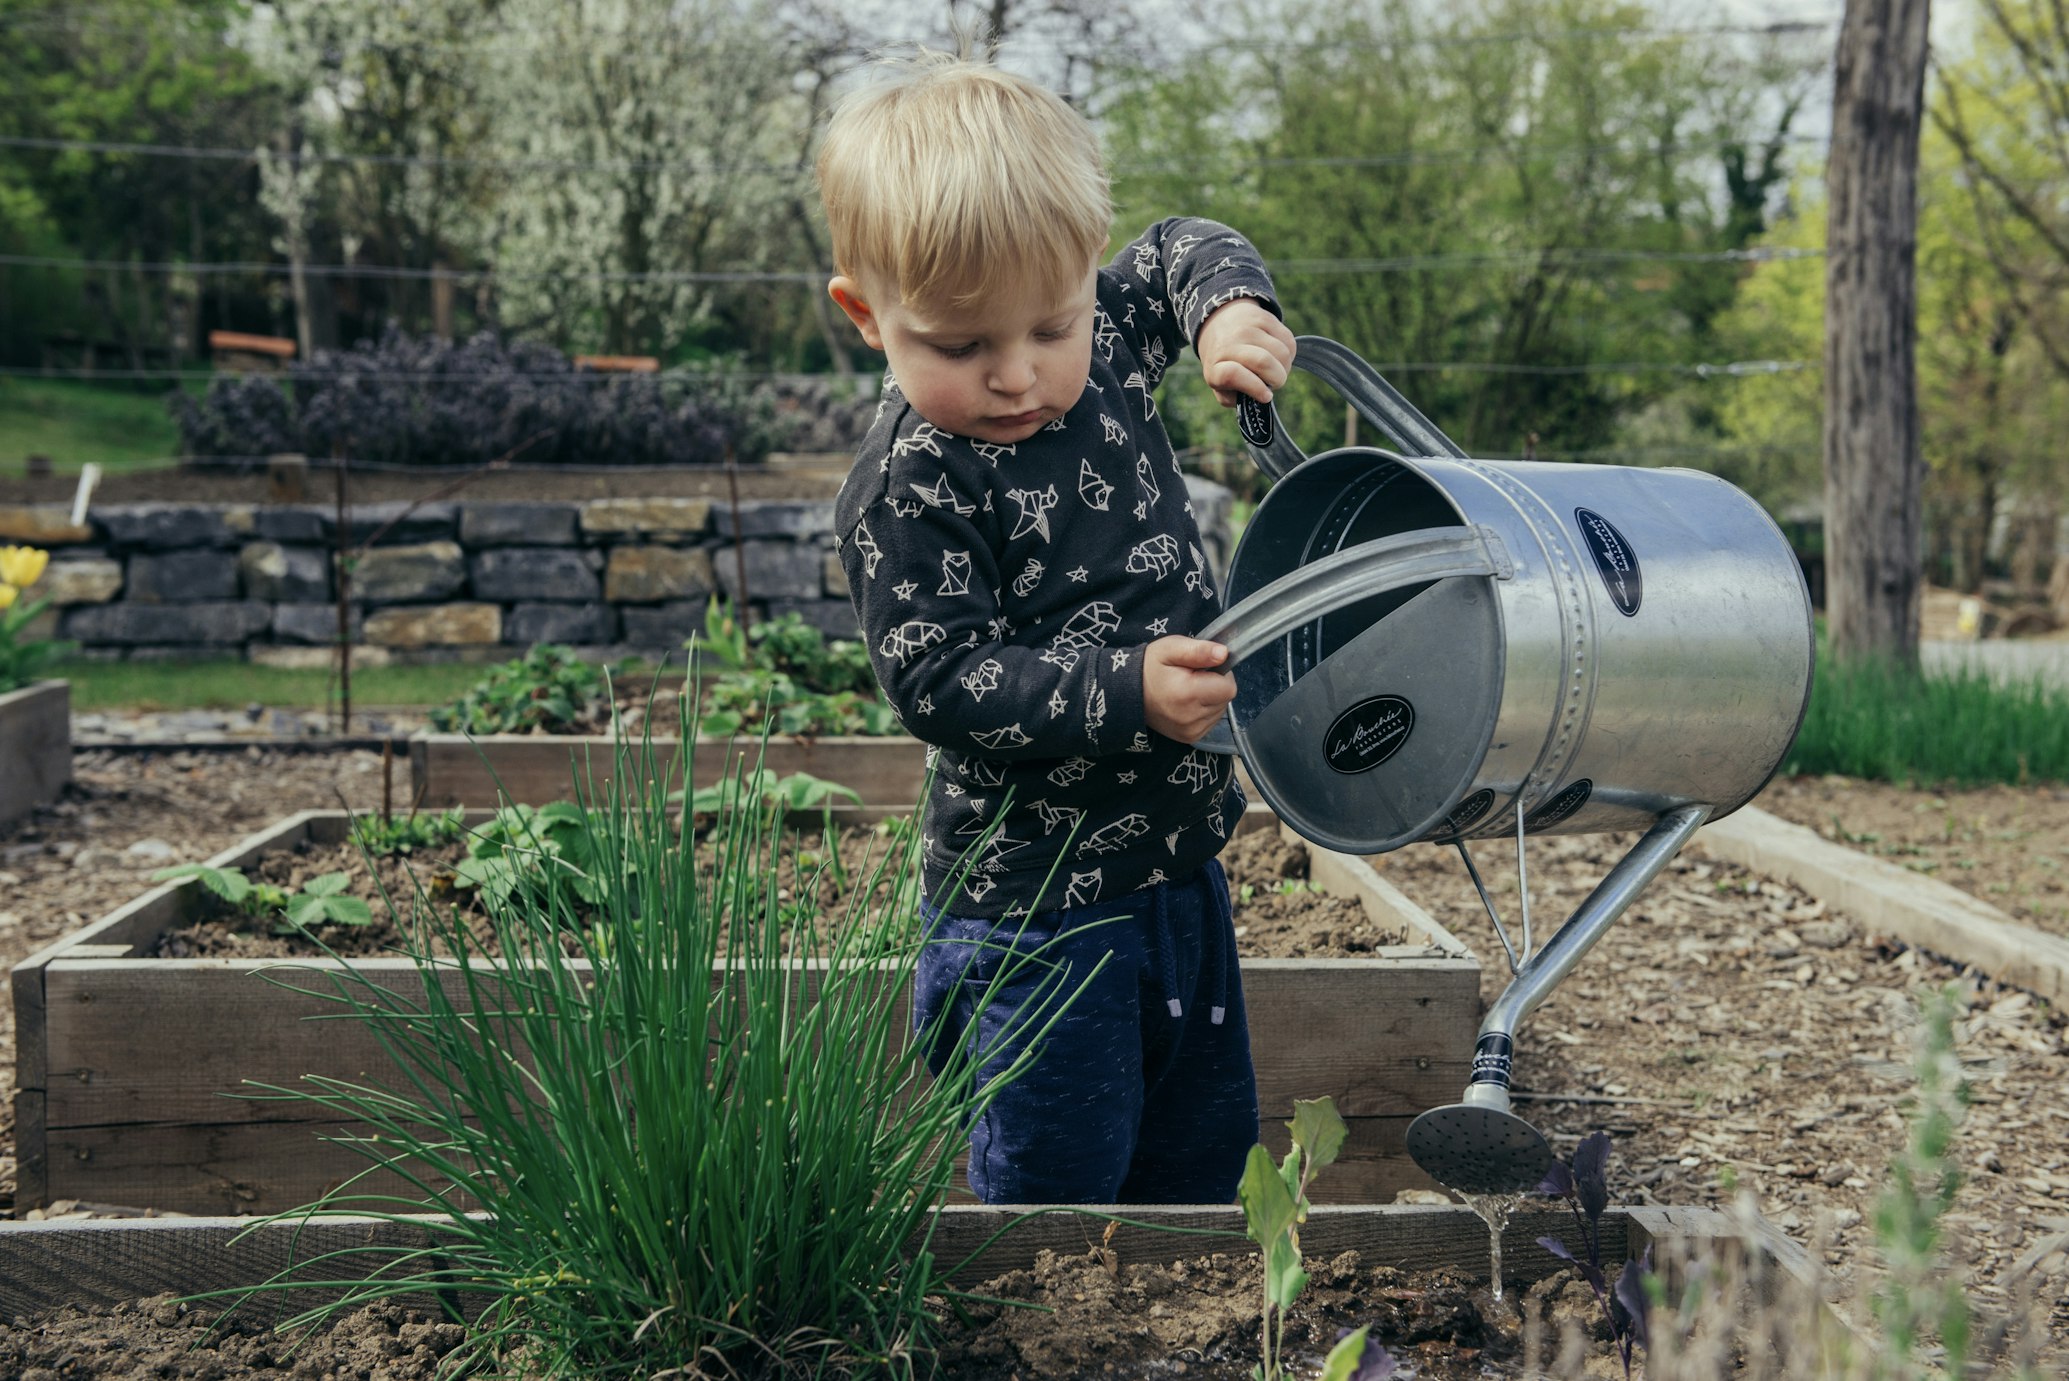 Child using a tin pail to water a garden